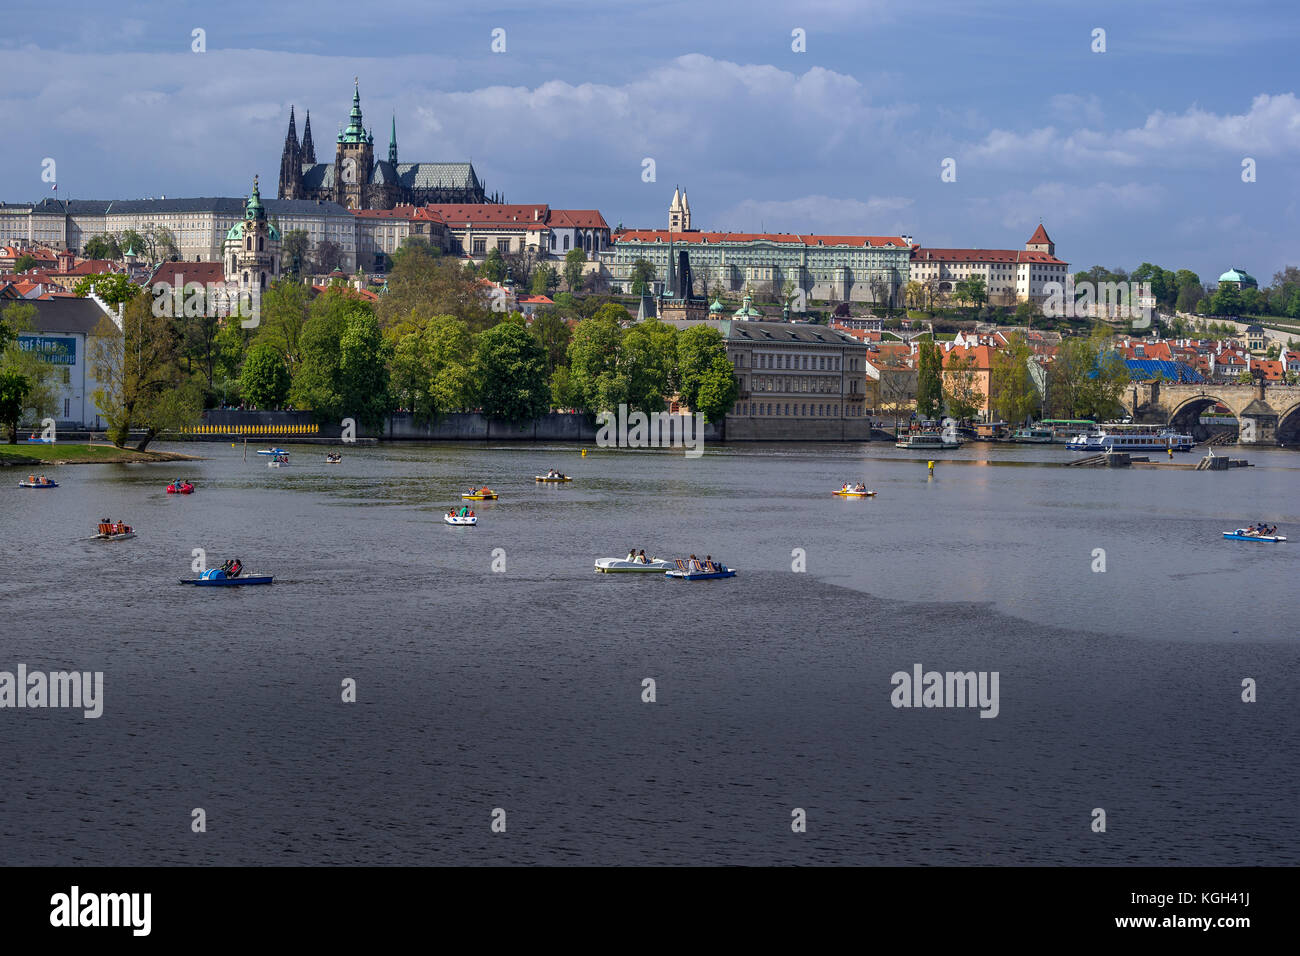 View of colorful old town and Prague castle with river Vltava, Czech Republic Stock Photo